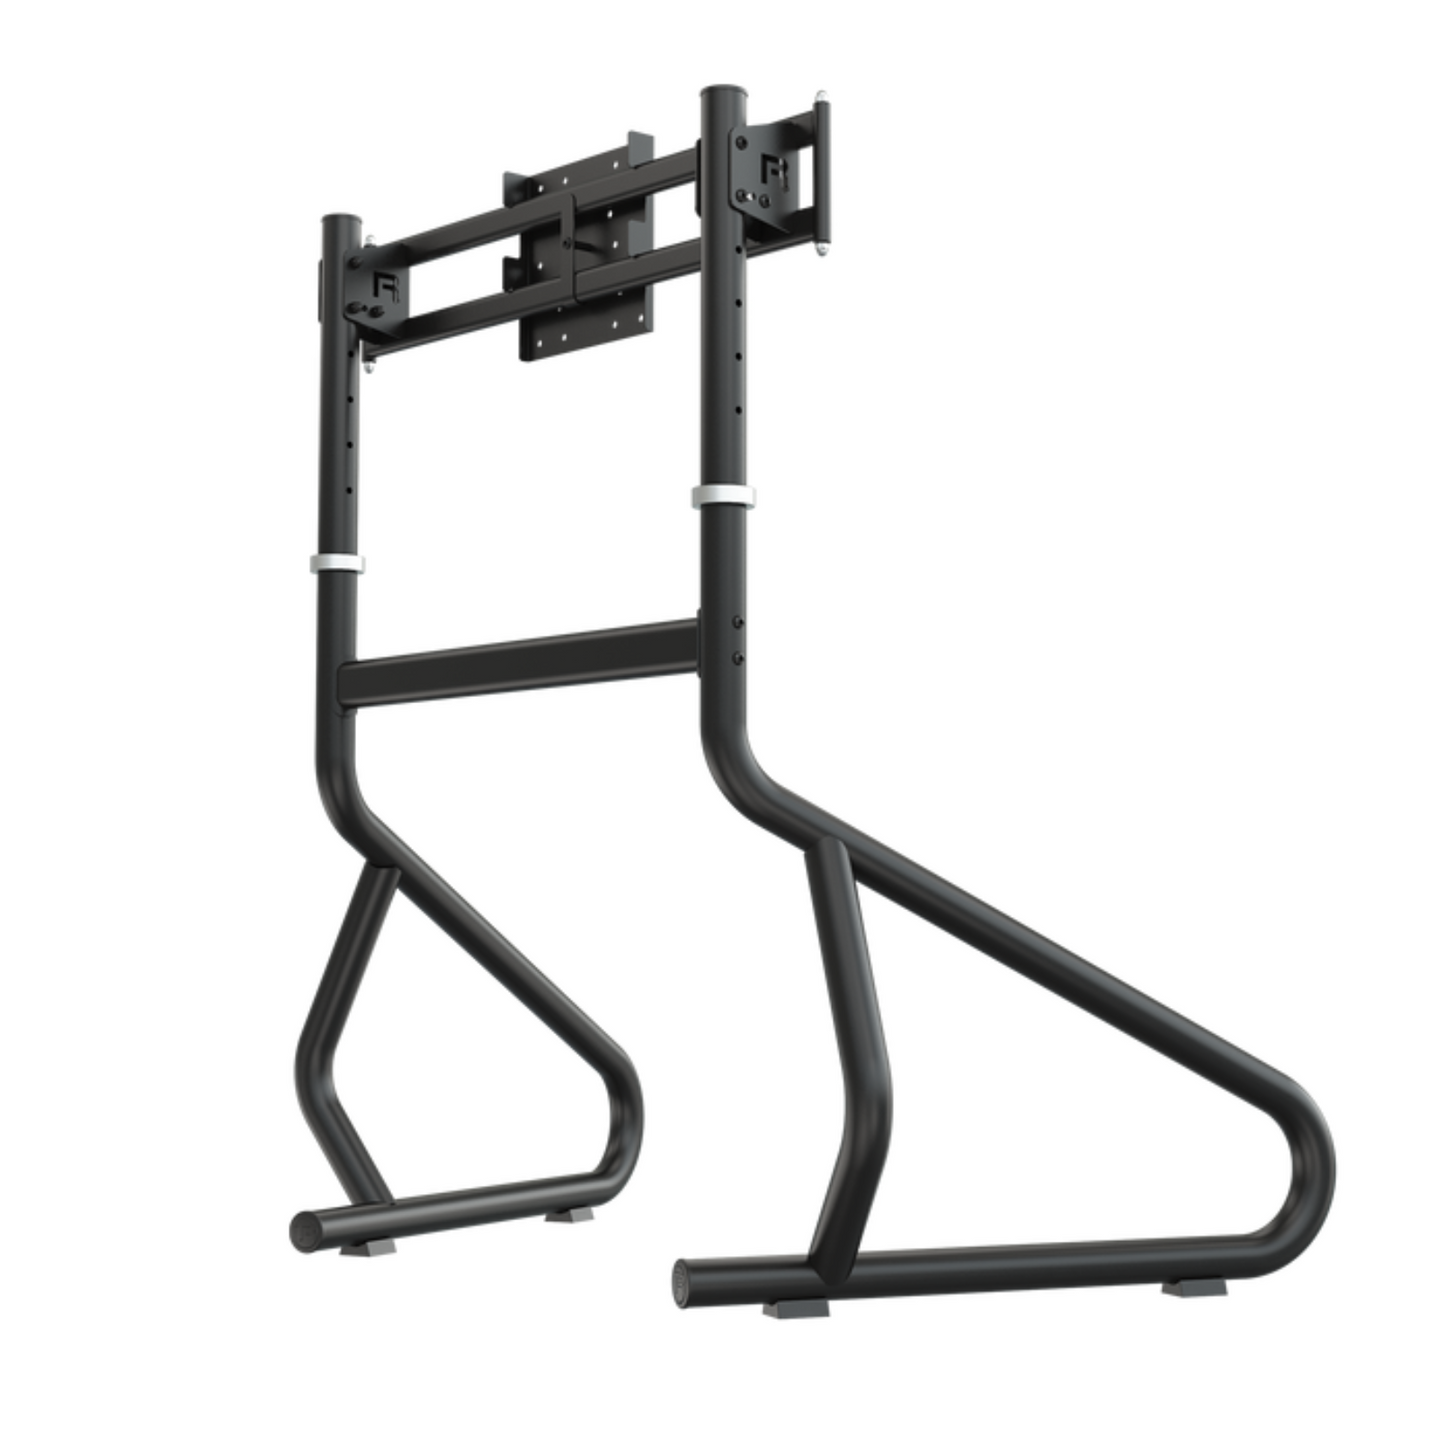 Trak Racer Freestanding Single Monitor Stand - Up to 80" Display